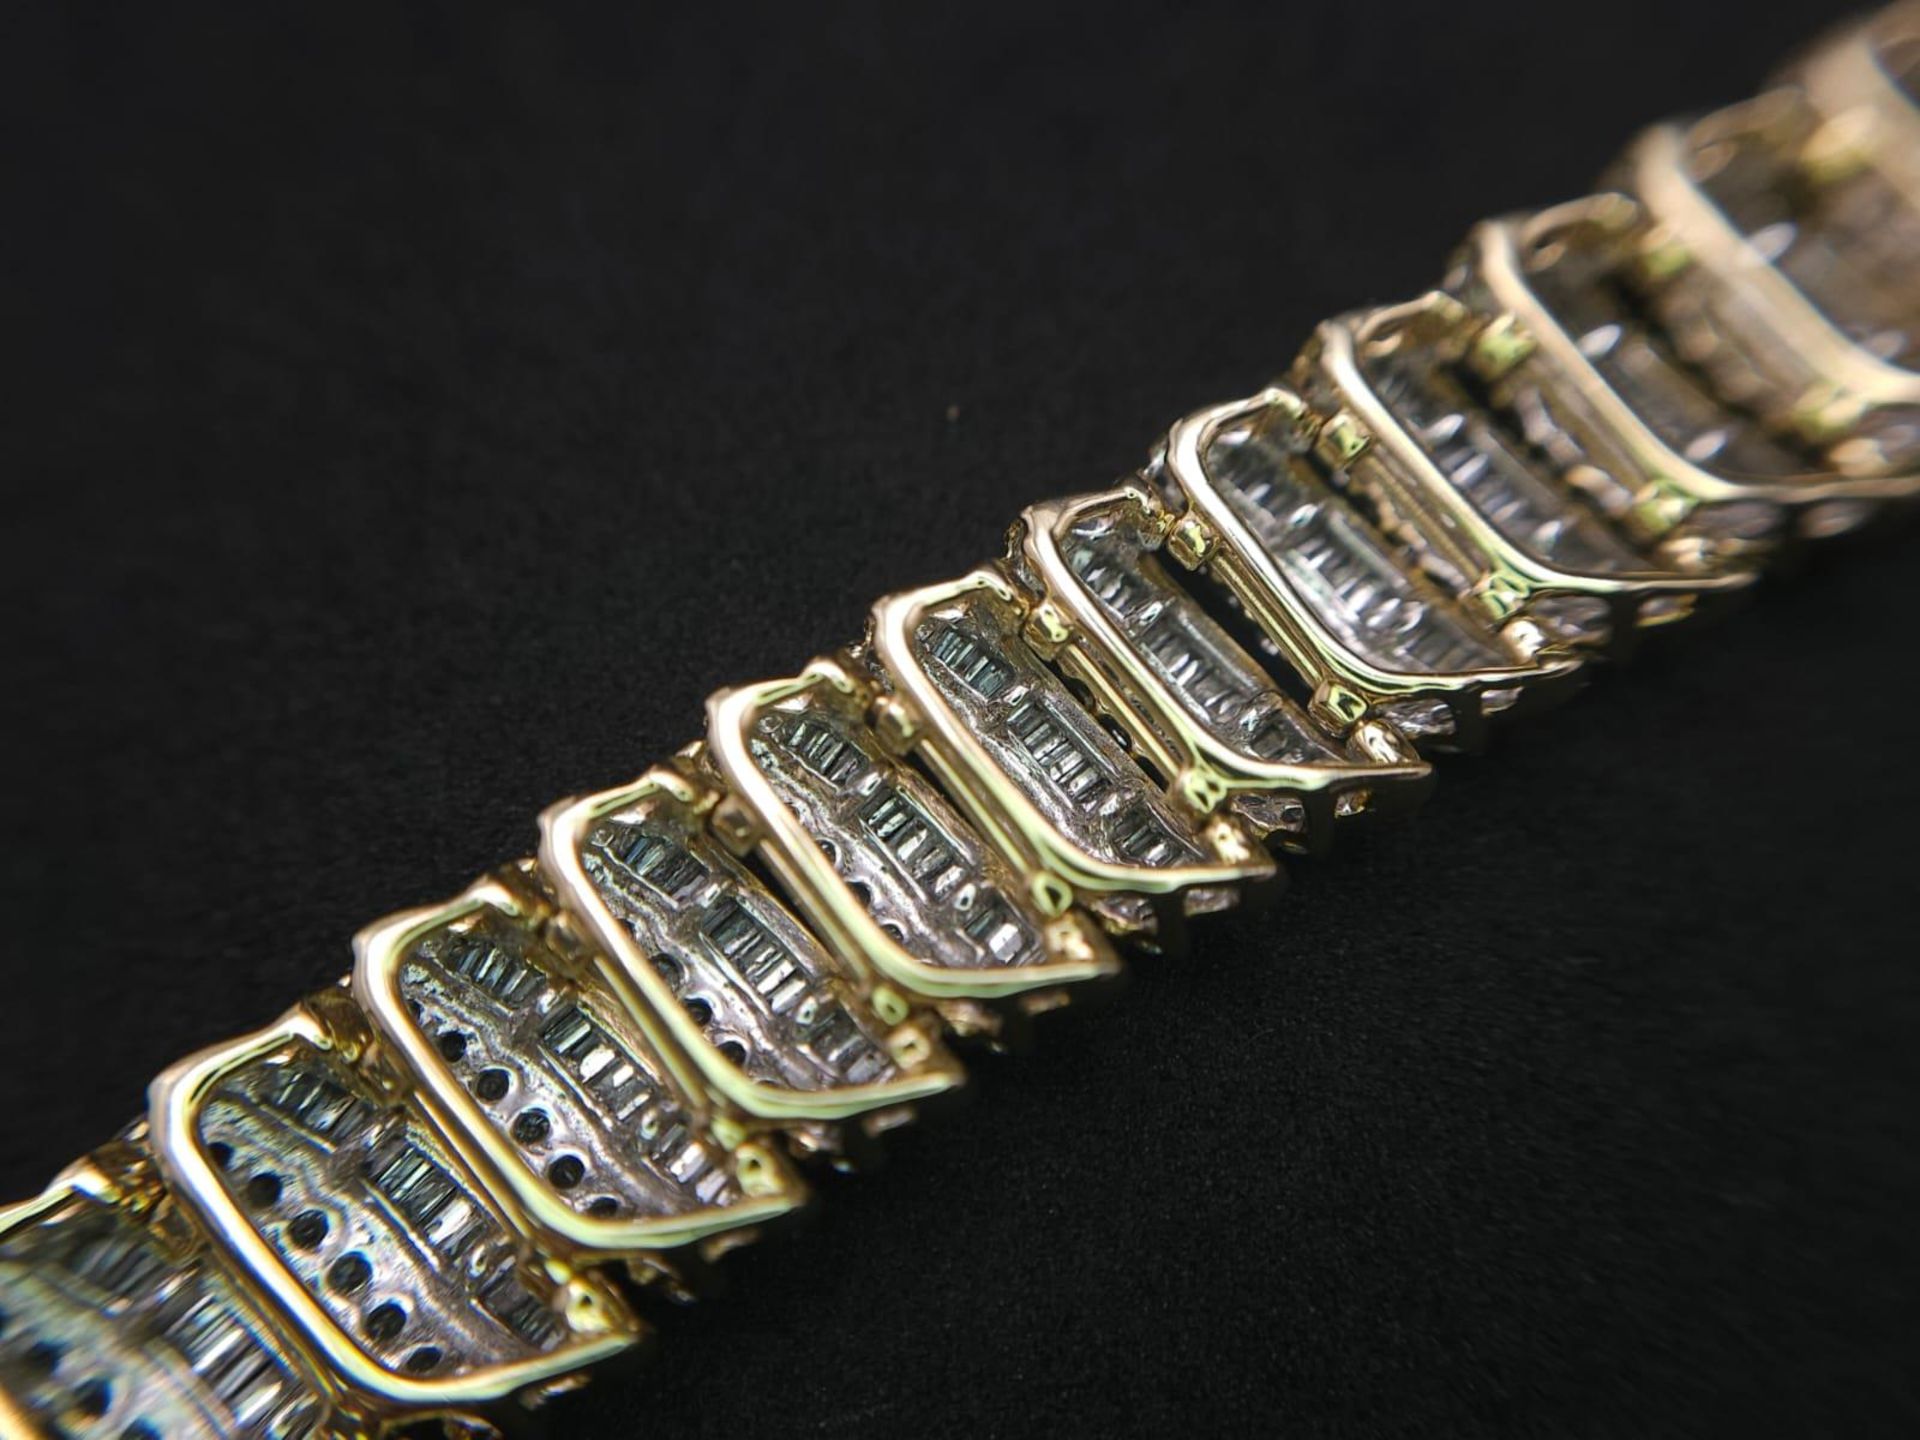 A BEAUTIFUL HEAD-TURNING 14K YELLOW GOLD DIAMOND TENNIS BRACELET WITH A MIXTURE OF ROUND AND - Image 9 of 10